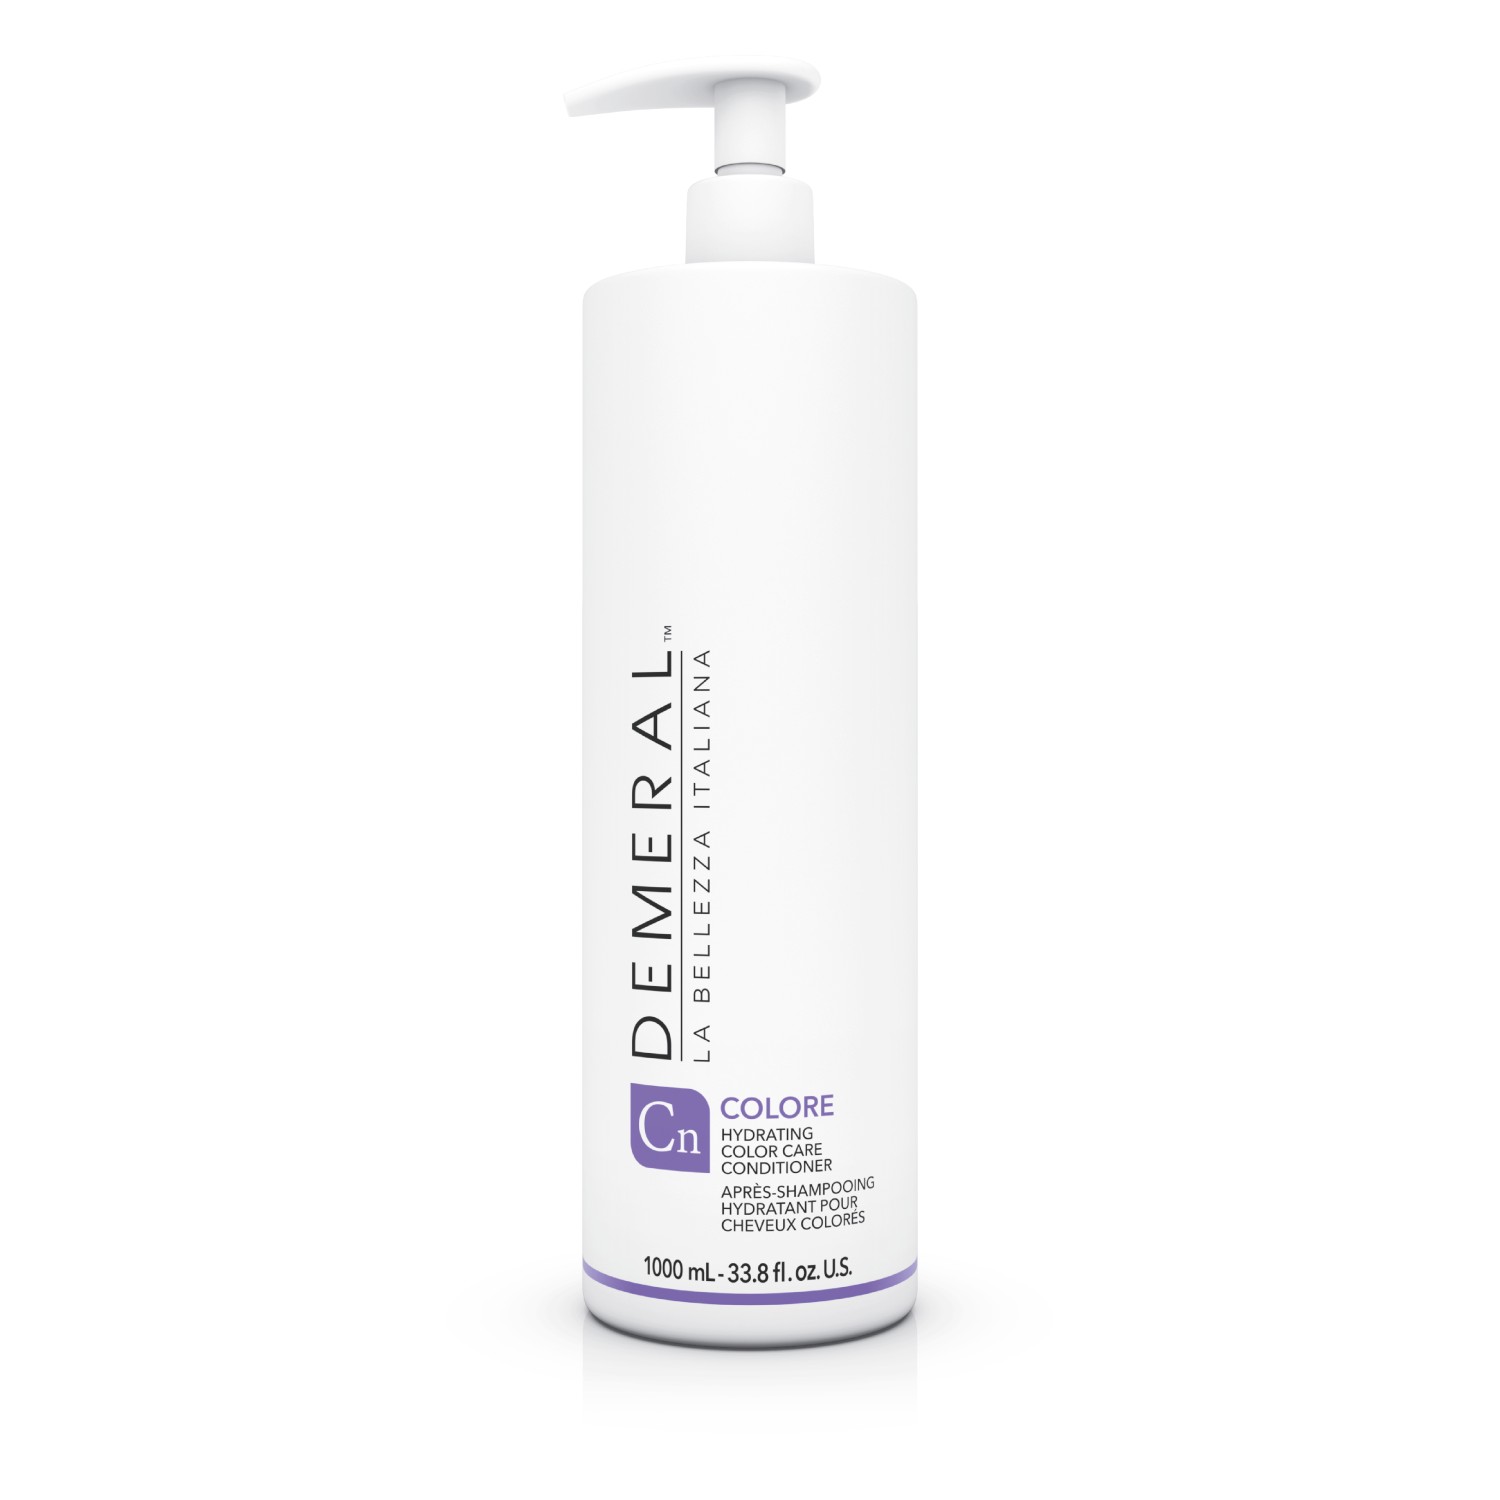 Hydrating Color Care Conditioner 1000 ml